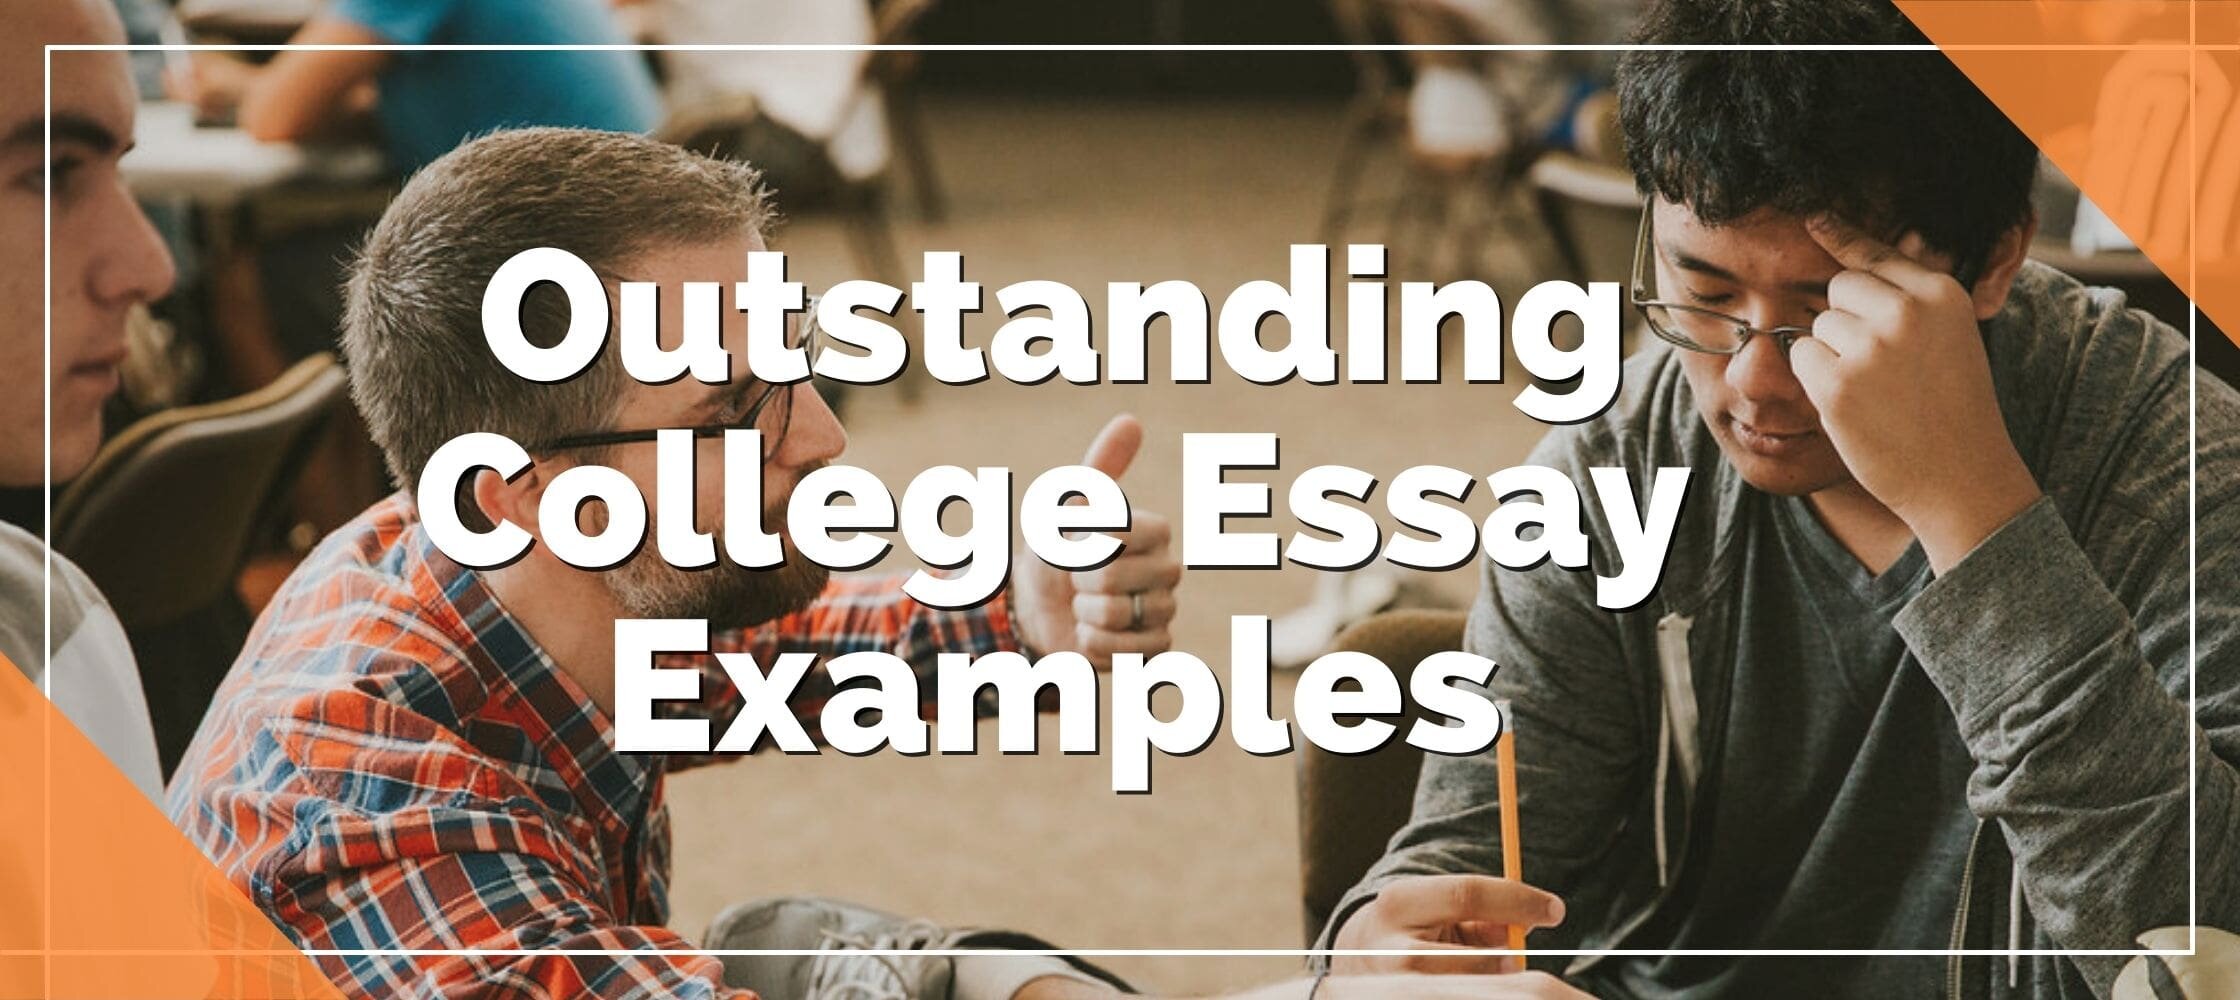 essay writing examples for students new school and have problem